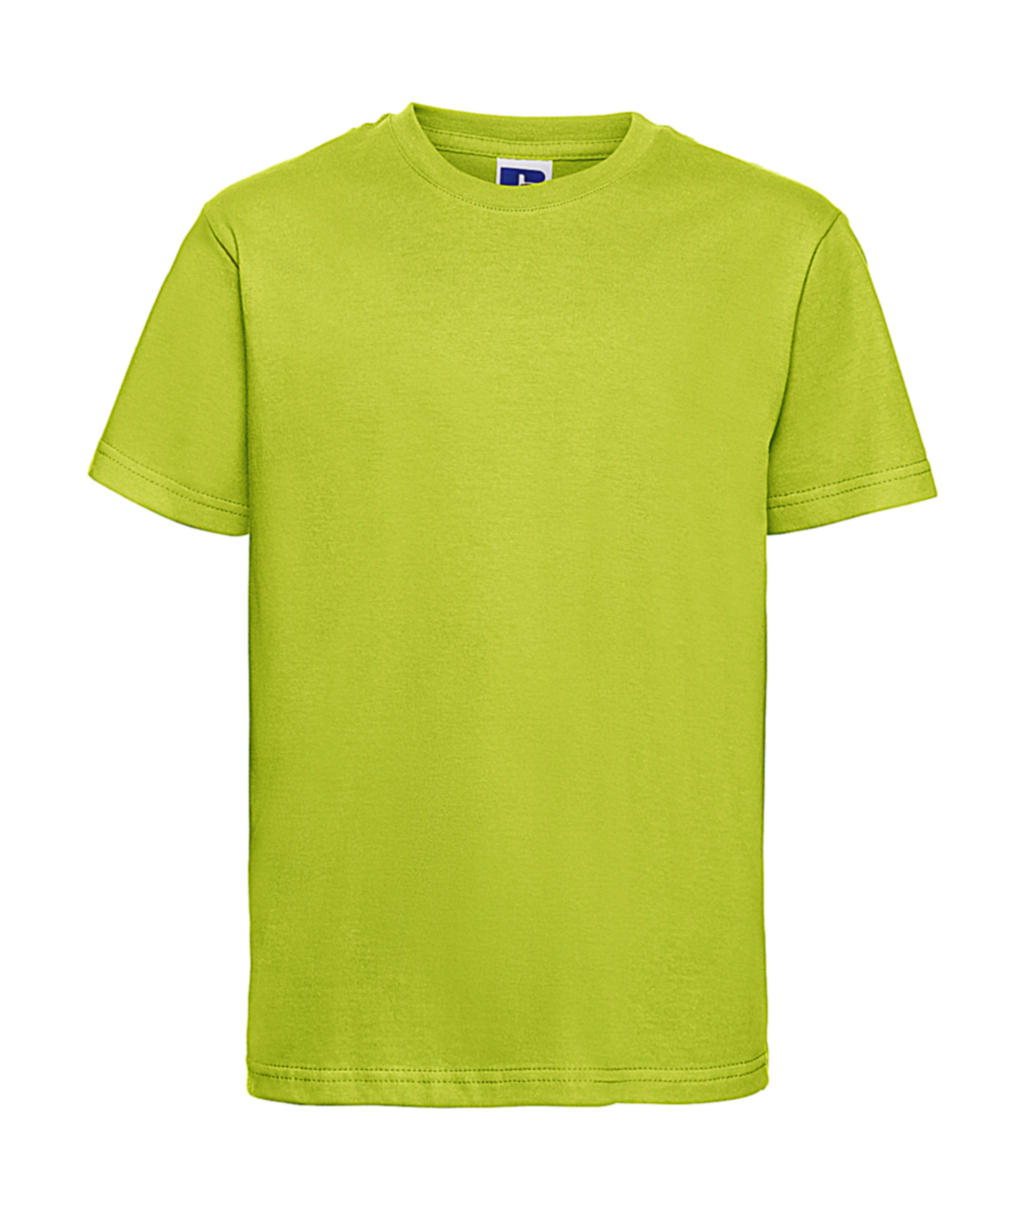  Kids Slim T-Shirt in Farbe Lime